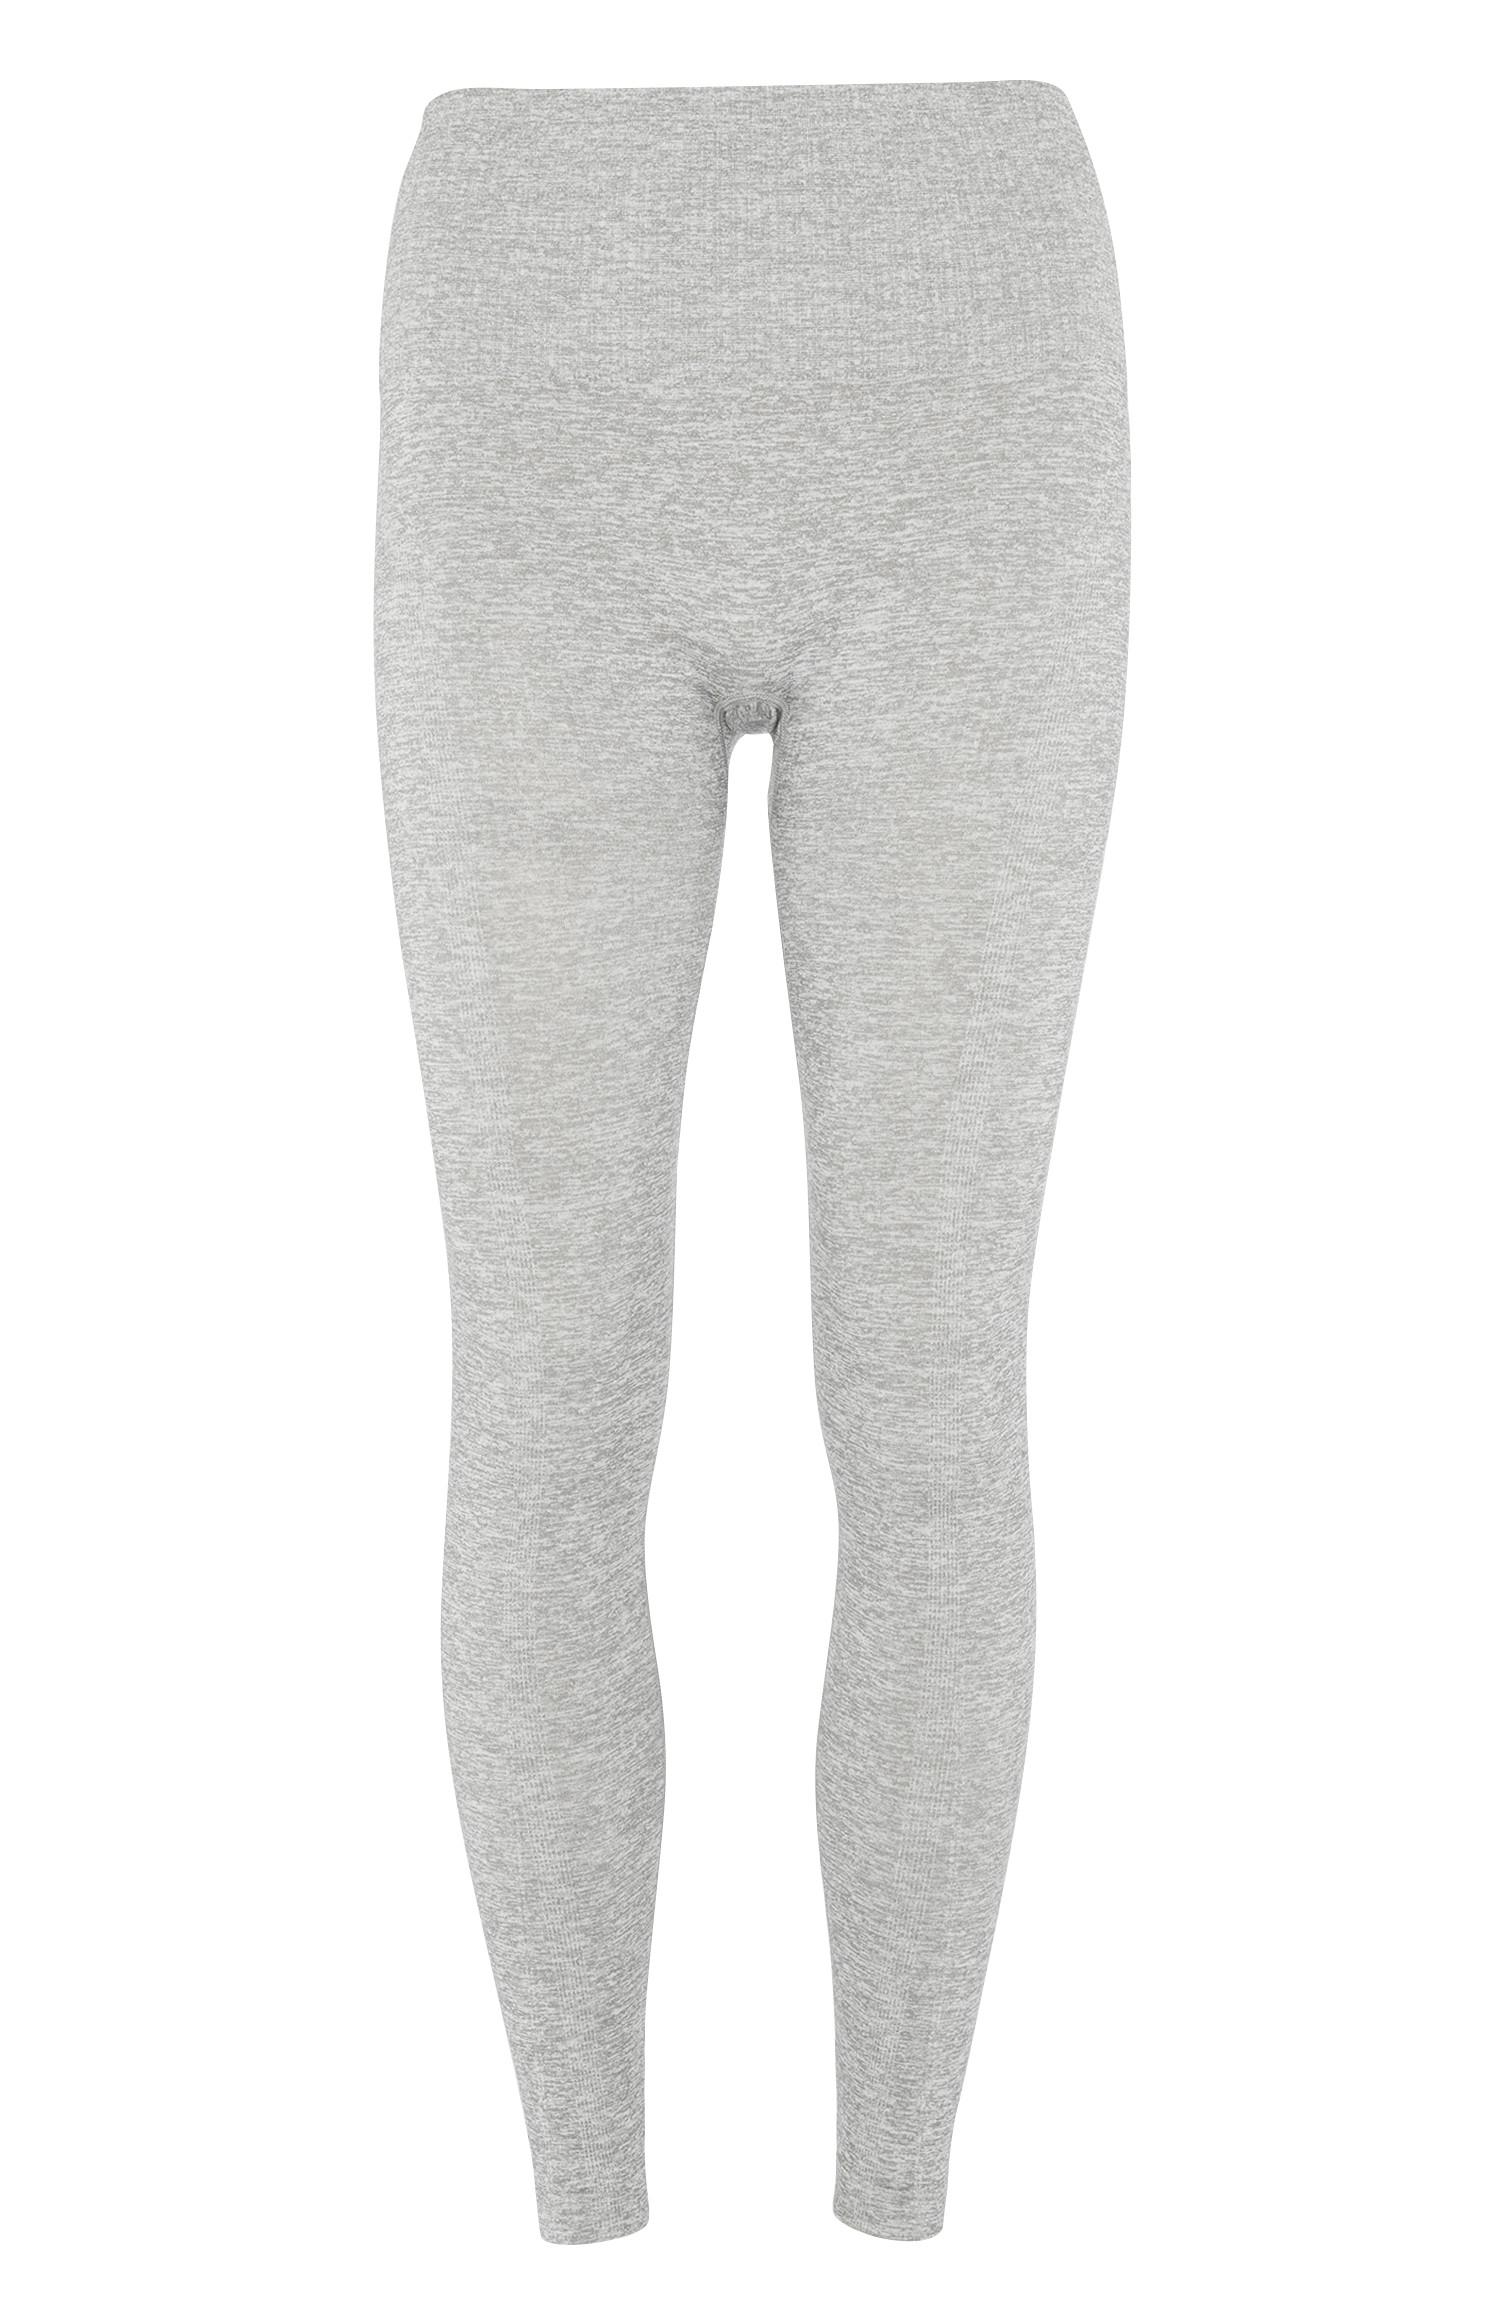 SVOKOR Korean Style Plus Fleece Velvet Fleece Lined Leggings Primark For  Women Winter Warm And Fashionable Trousers With Thick Jeans Dropship 201109  From Dou04, $9.49 | DHgate.Com